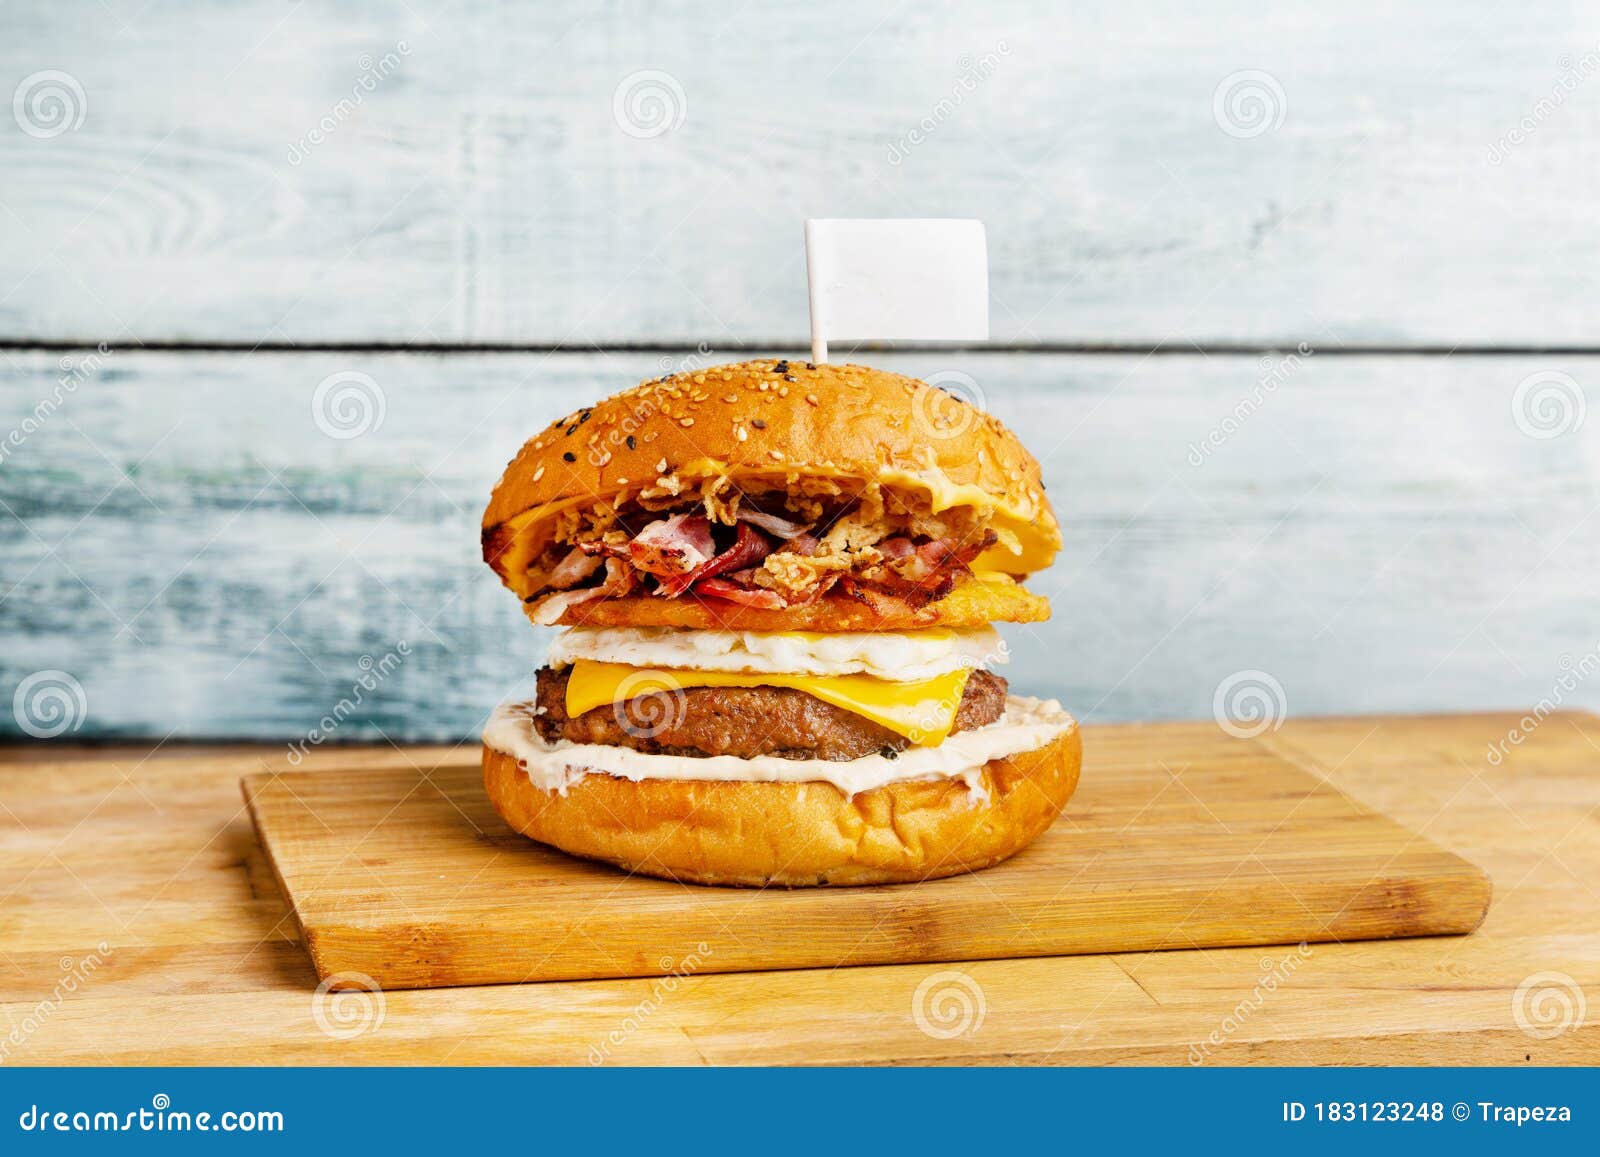 Burger, Hamburger with Meat and Vegetables Stock Photo - Image of ...